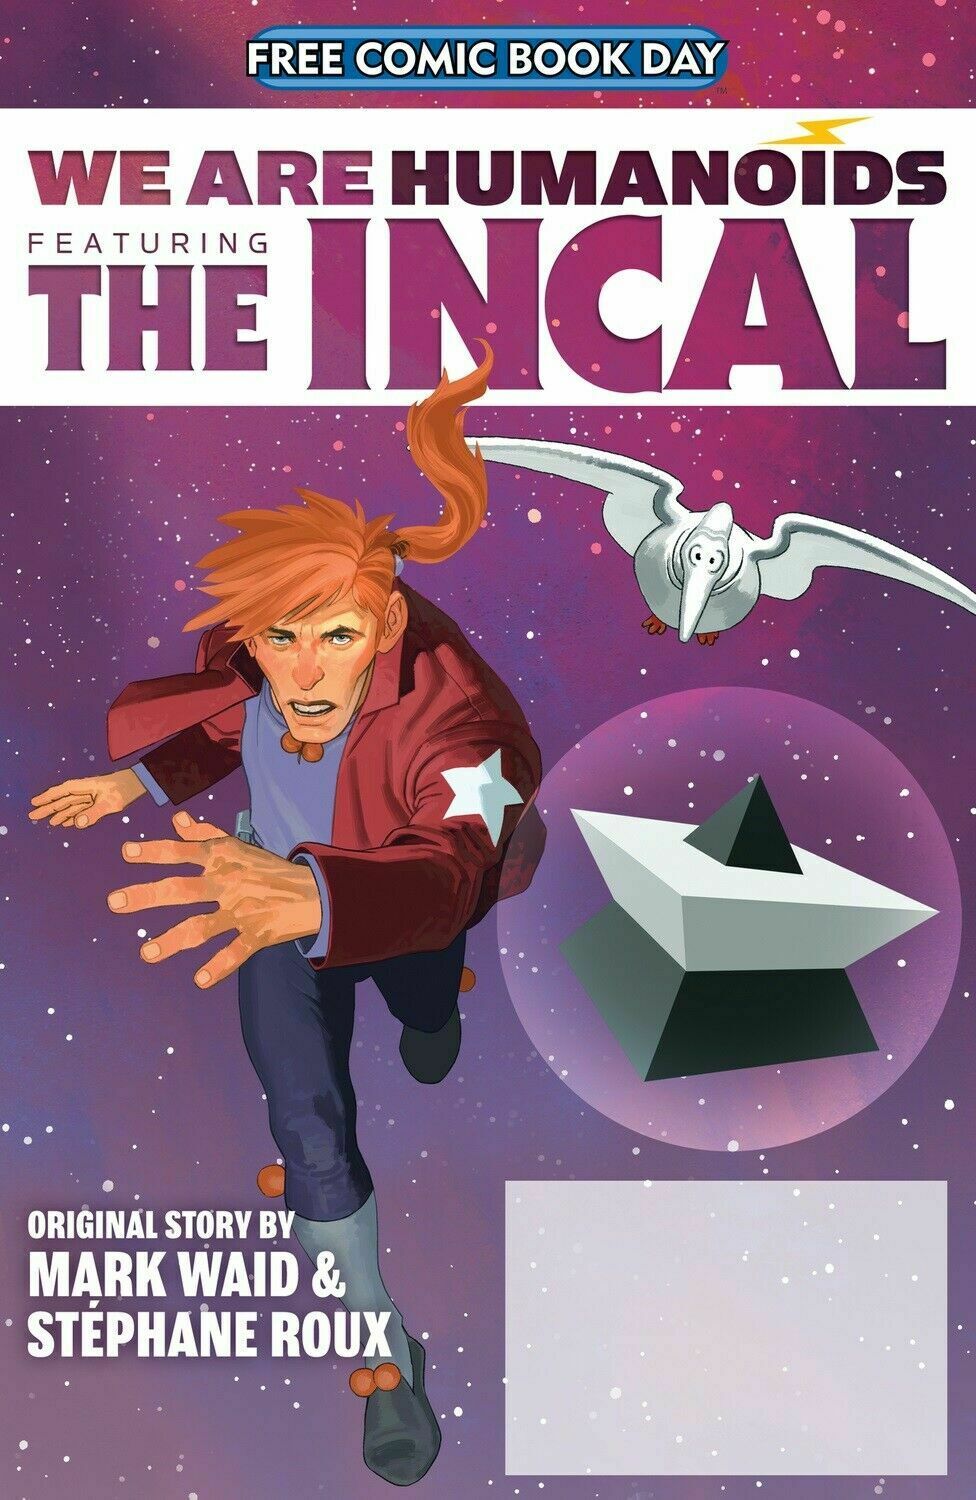 FCBD 2020 WE ARE HUMANOIDS FEATURING THE INCAL